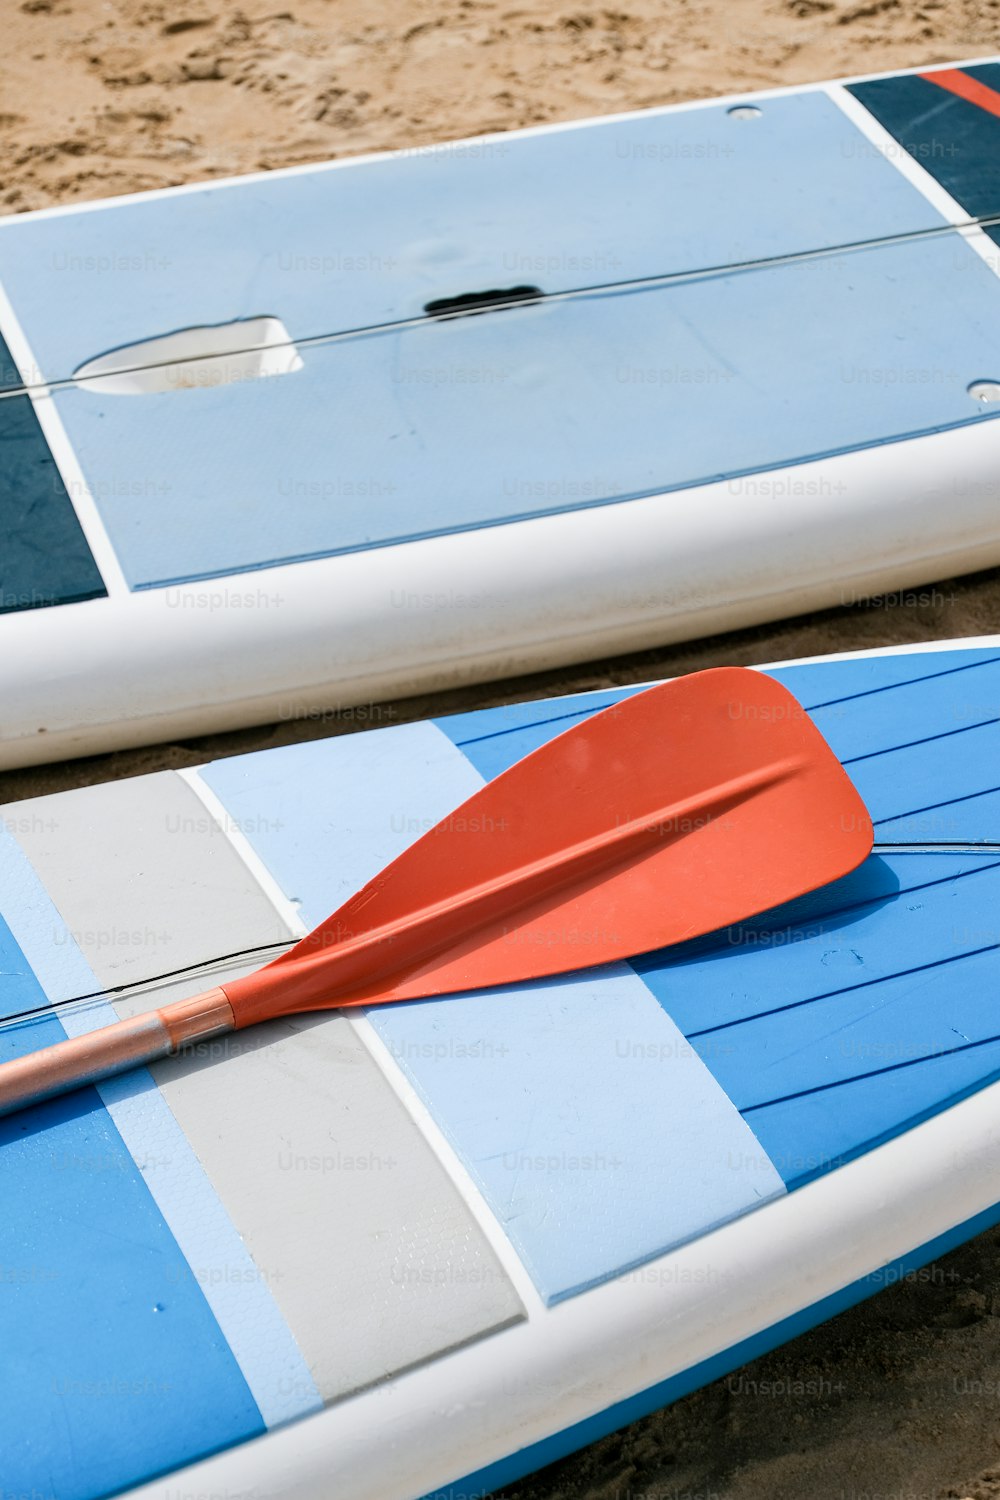 two surf boards with a red paddle on top of them